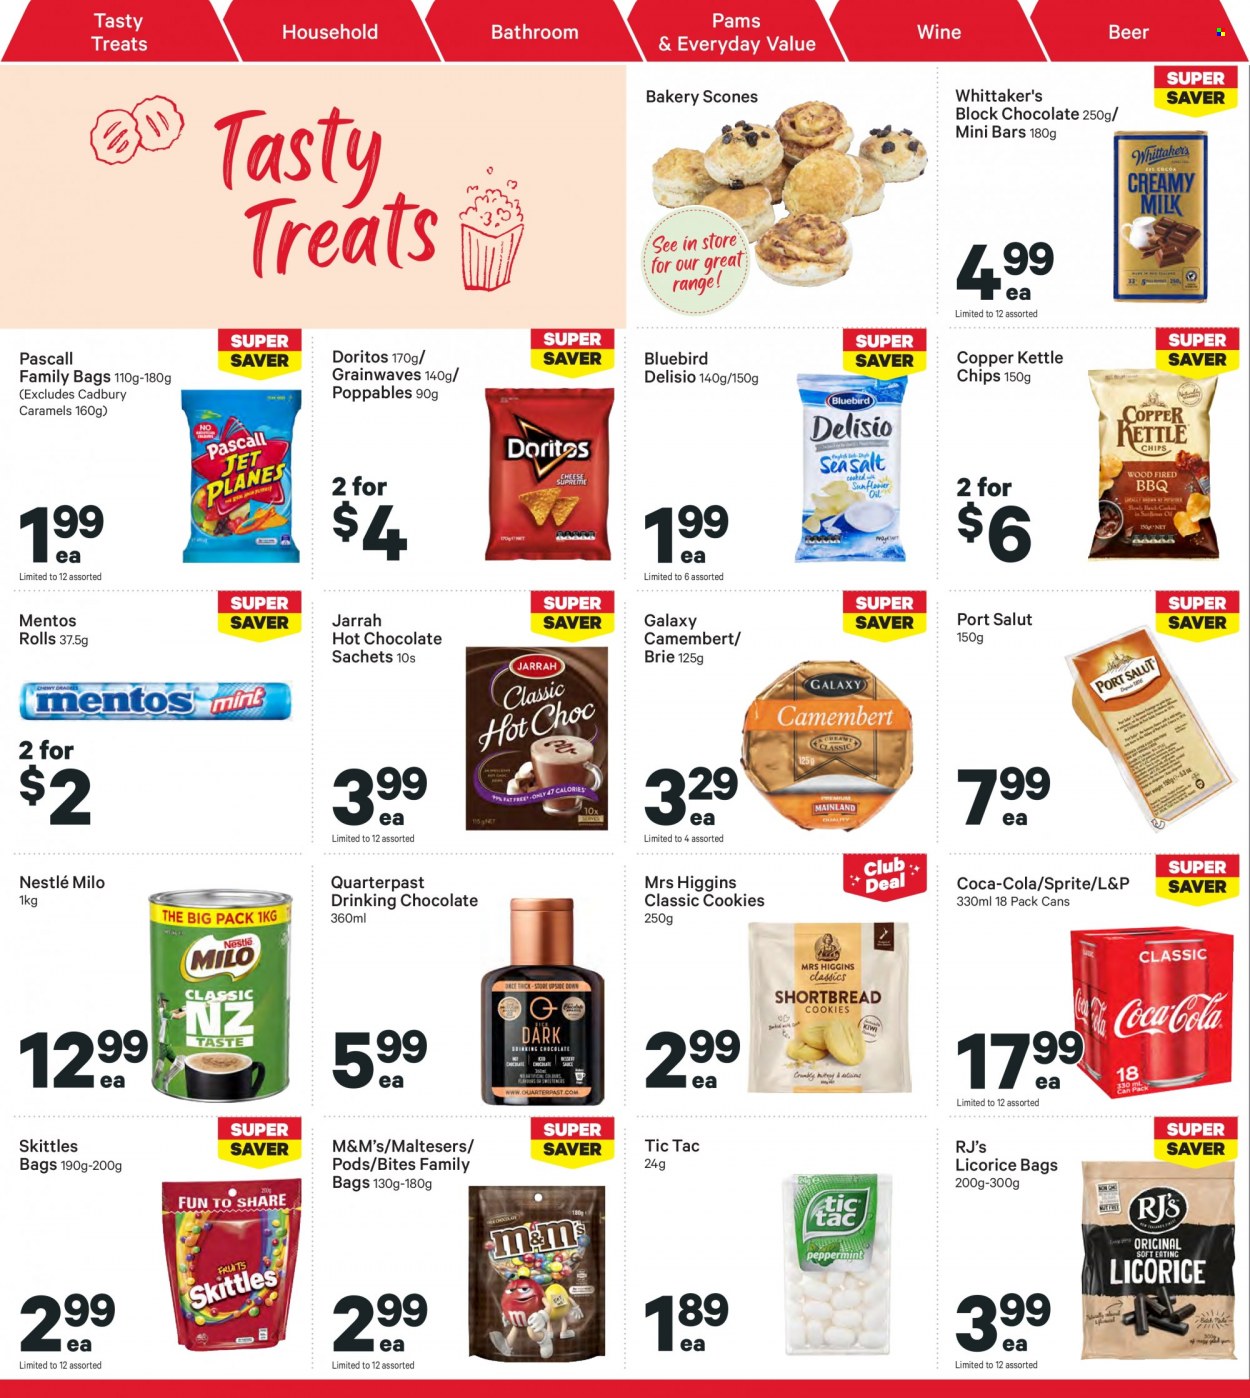 thumbnail - New World mailer - 16.05.2022 - 22.05.2022 - Sales products - camembert, brie, Milo, cookies, Nestlé, Mentos, M&M's, Maltesers, Cadbury, Whittaker's, Skittles, Tic Tac, Doritos, chips, Bluebird, Delisio, Copper Kettle, Coca-Cola, Sprite, L&P, hot chocolate, wine, beer. Page 22.